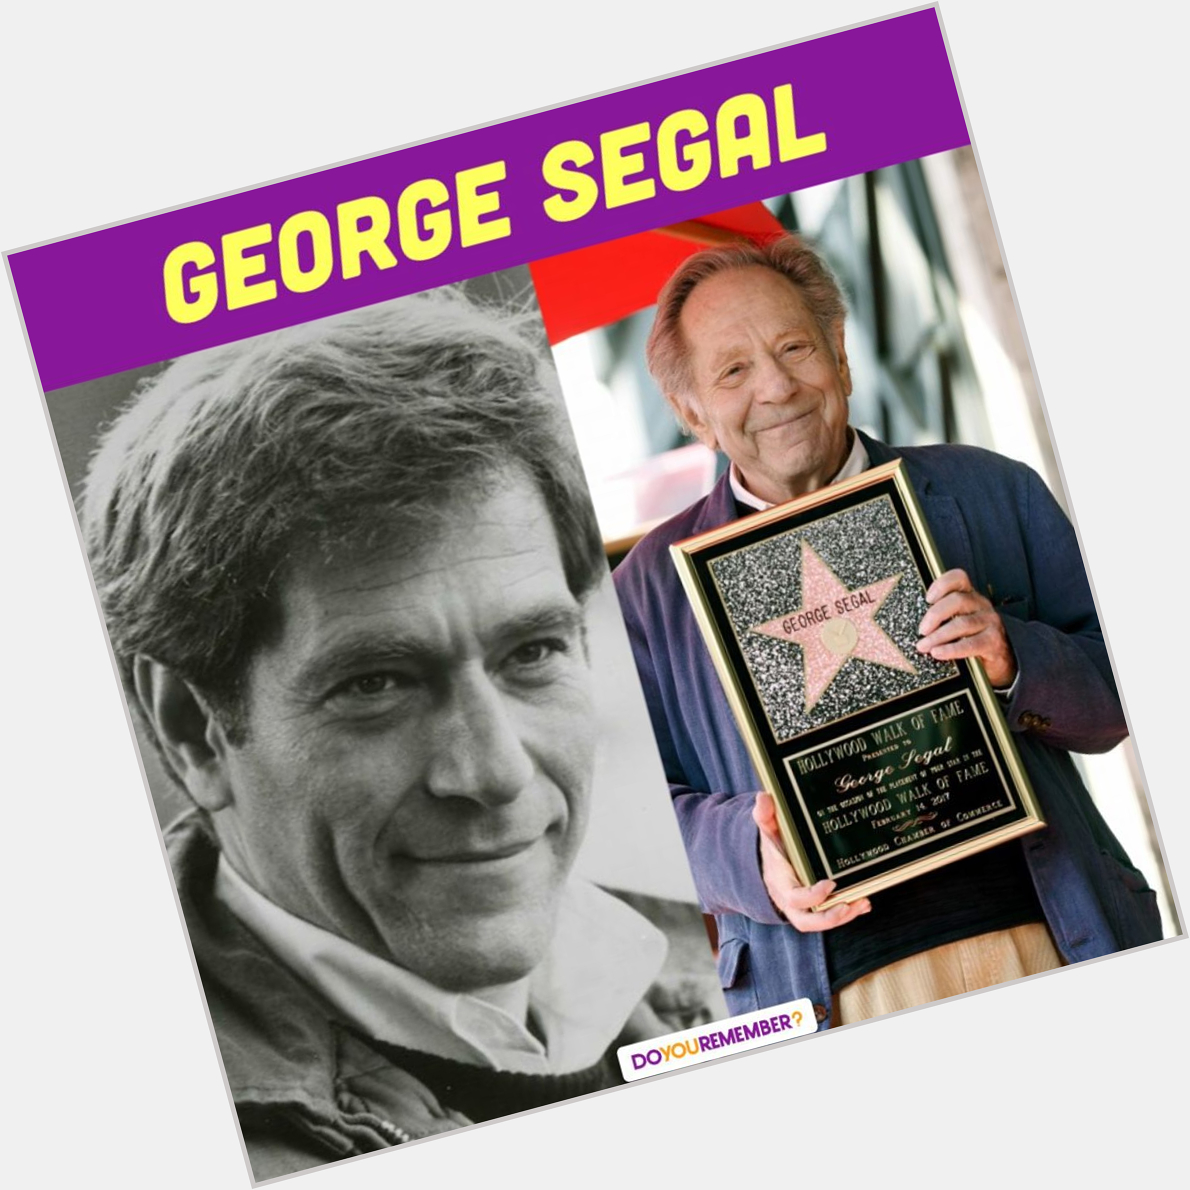 Happy 86th Birthday to George Segal! What do you remember him from? 